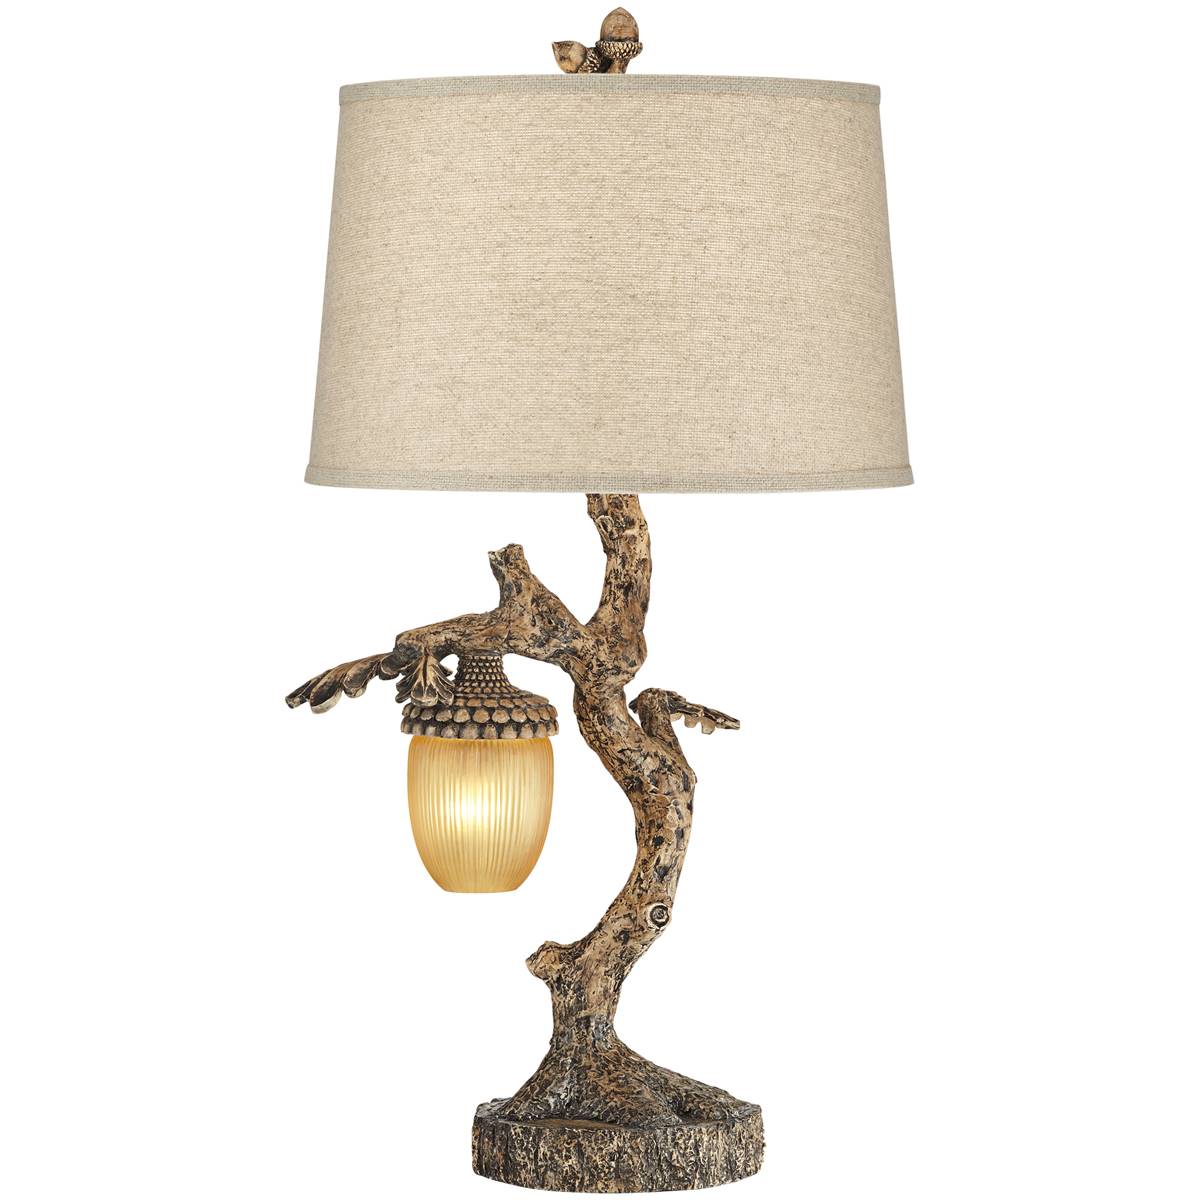 Pacific Coast Lighting Muir Woods 31in. Natural Table Lamp